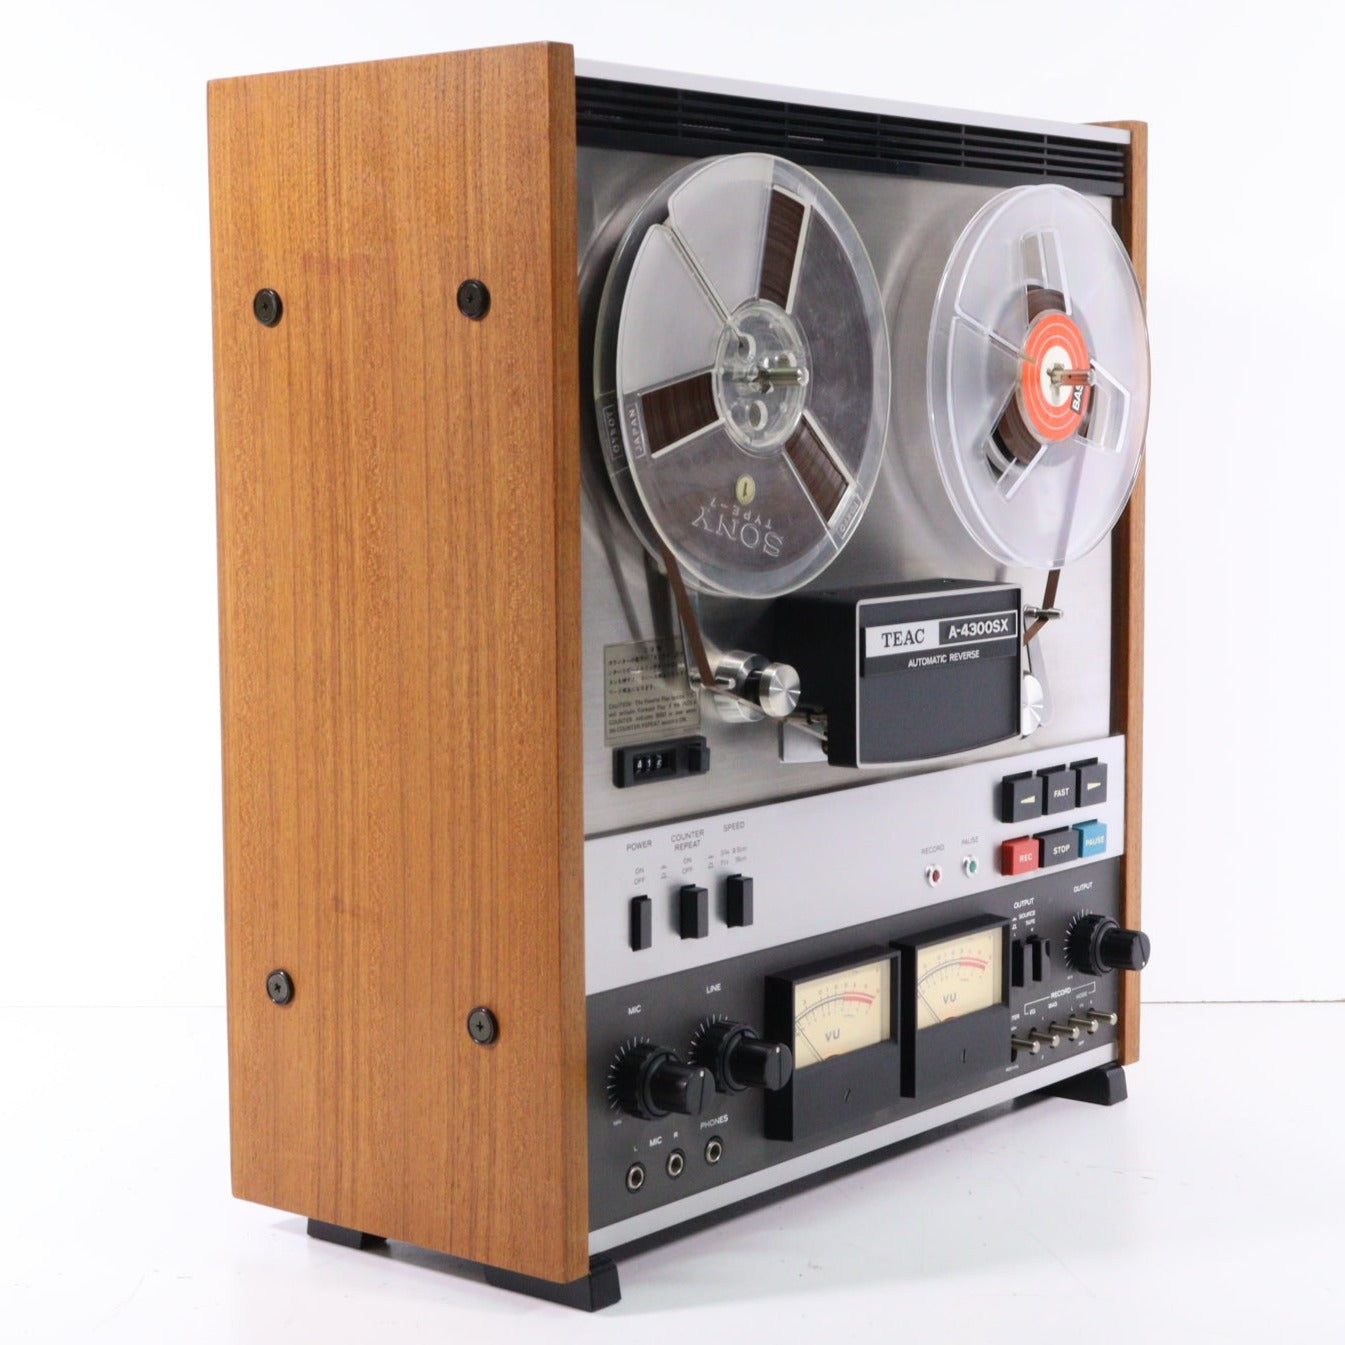 https://spencertified.com/cdn/shop/files/Teac-A-4300SX-Reel-to-Reel-Stereo-Tape-Deck-with-Auto-Reverse-Reel-to-Reel-Tape-Players-Recorders-3.jpg?v=1699649670